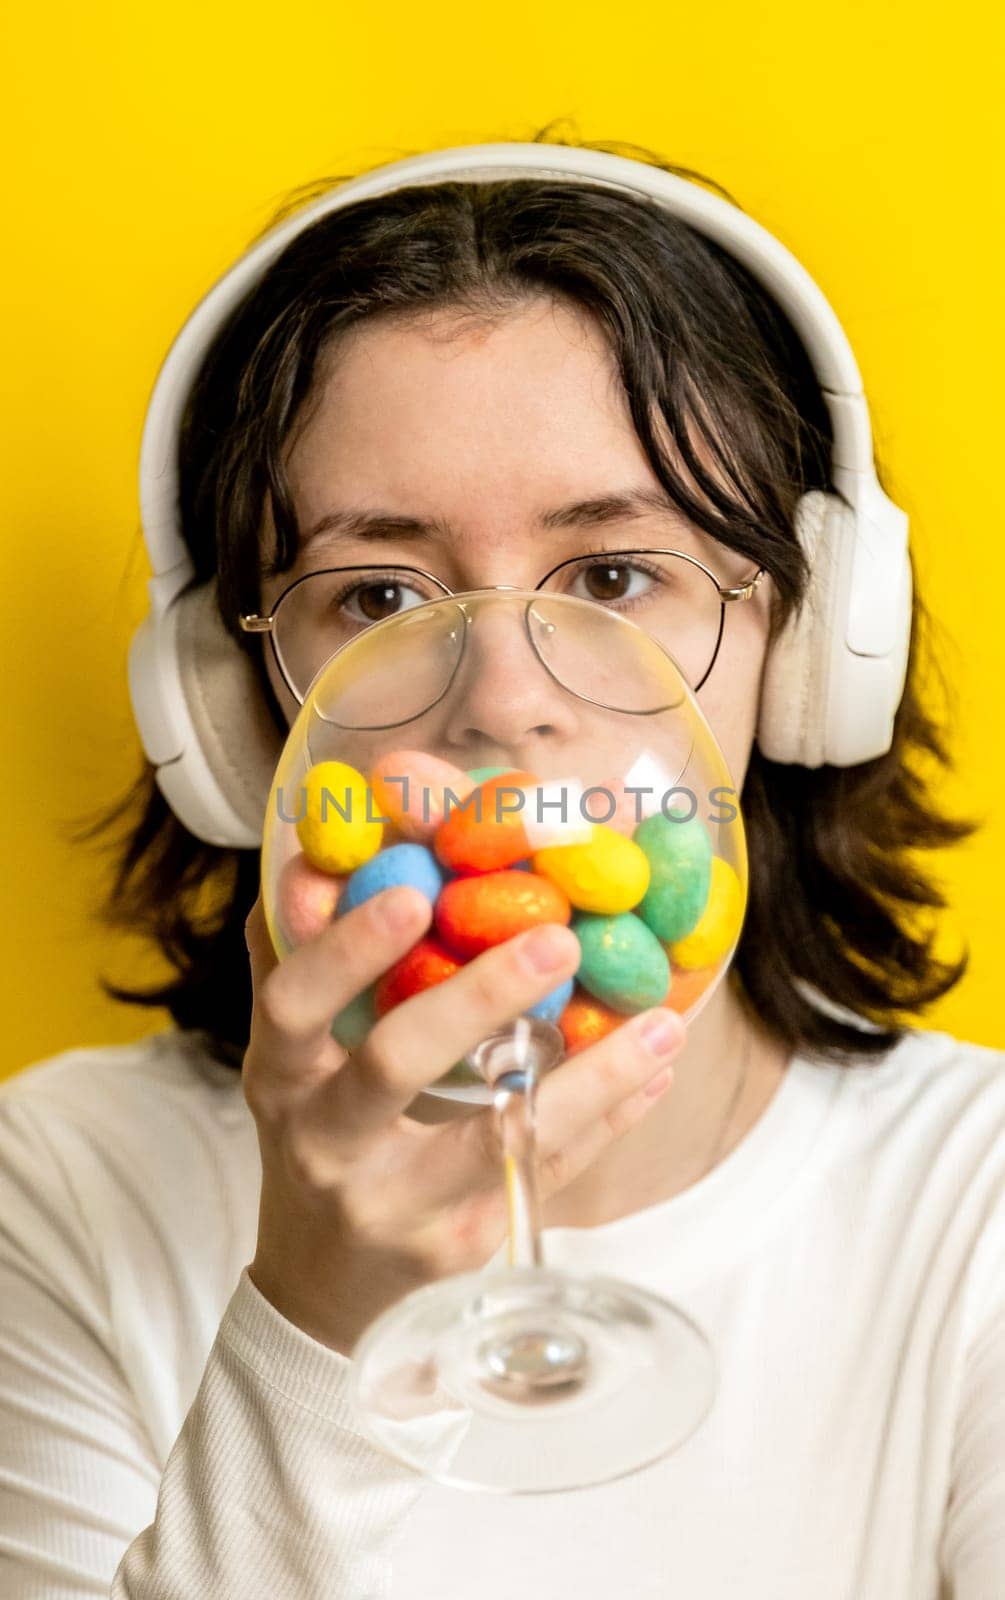 Portrait of one young Caucasian beautiful teenage girl in glasses and headphones drinks from a wine glass with Easter marble decorative eggs on a yellow background on a spring day in the room and looks at the camera, side view close-up with selective focus.